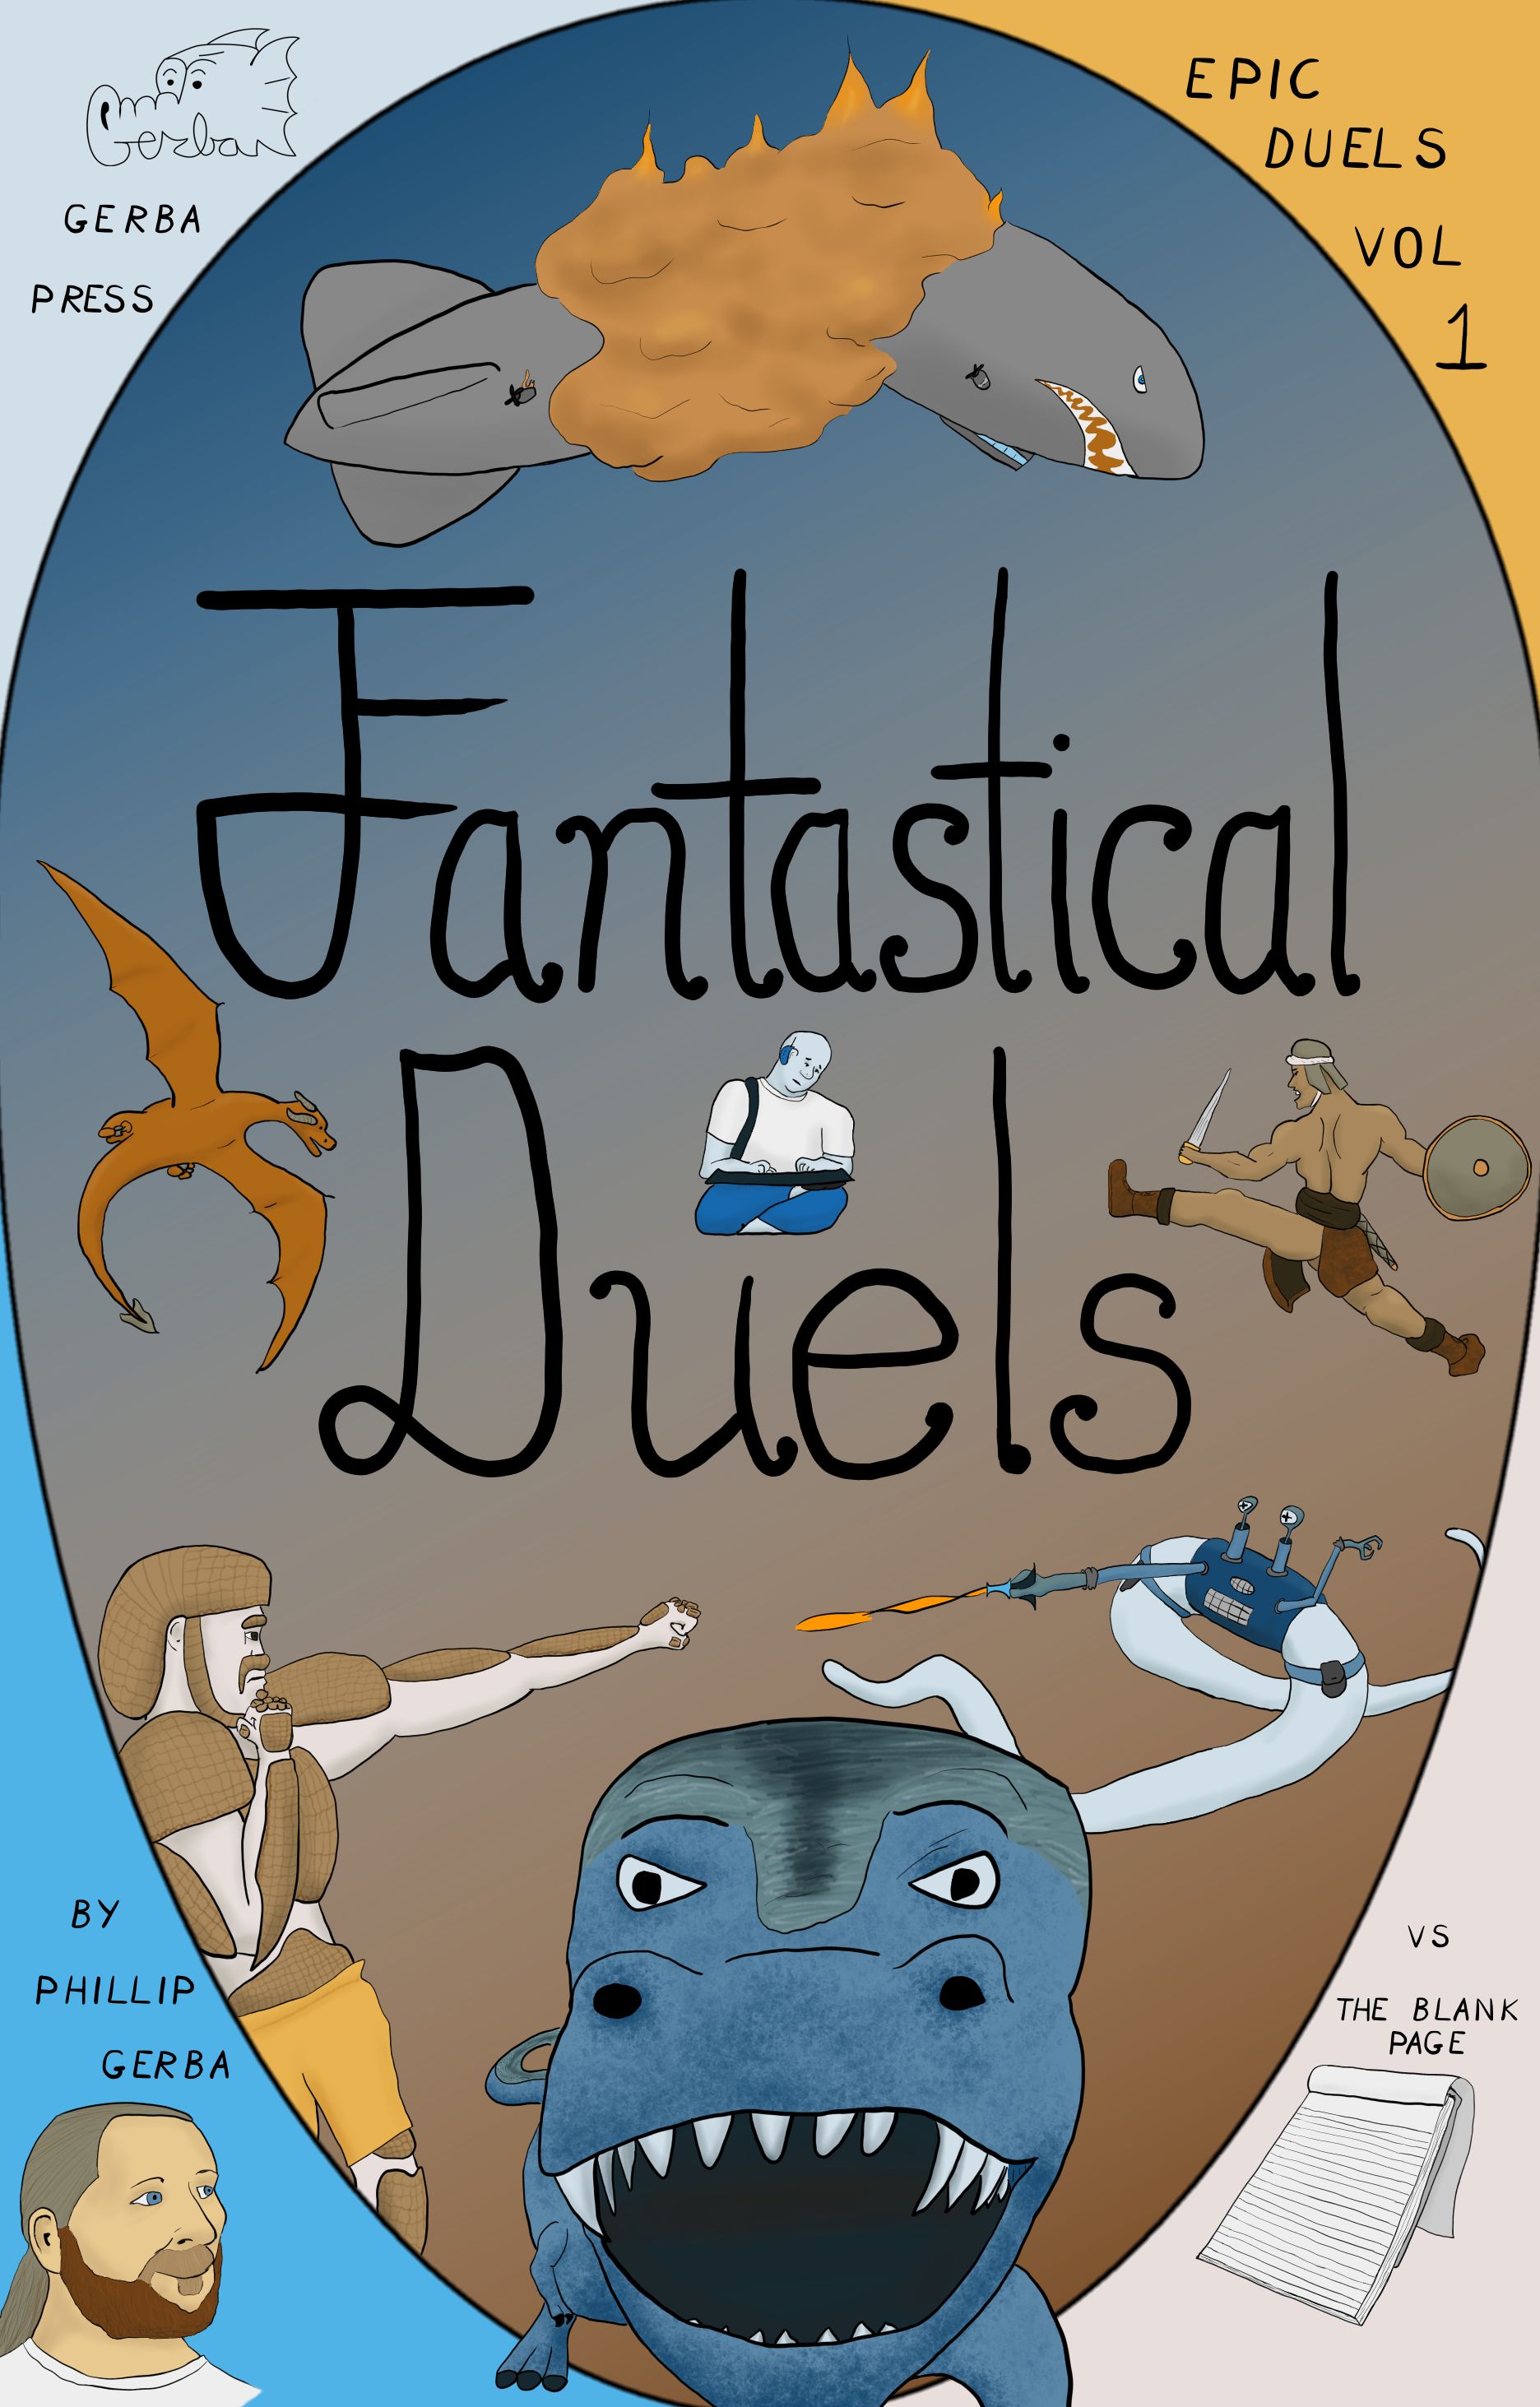 A comic book cover featuring many of the dulests from Fantastical Duels.